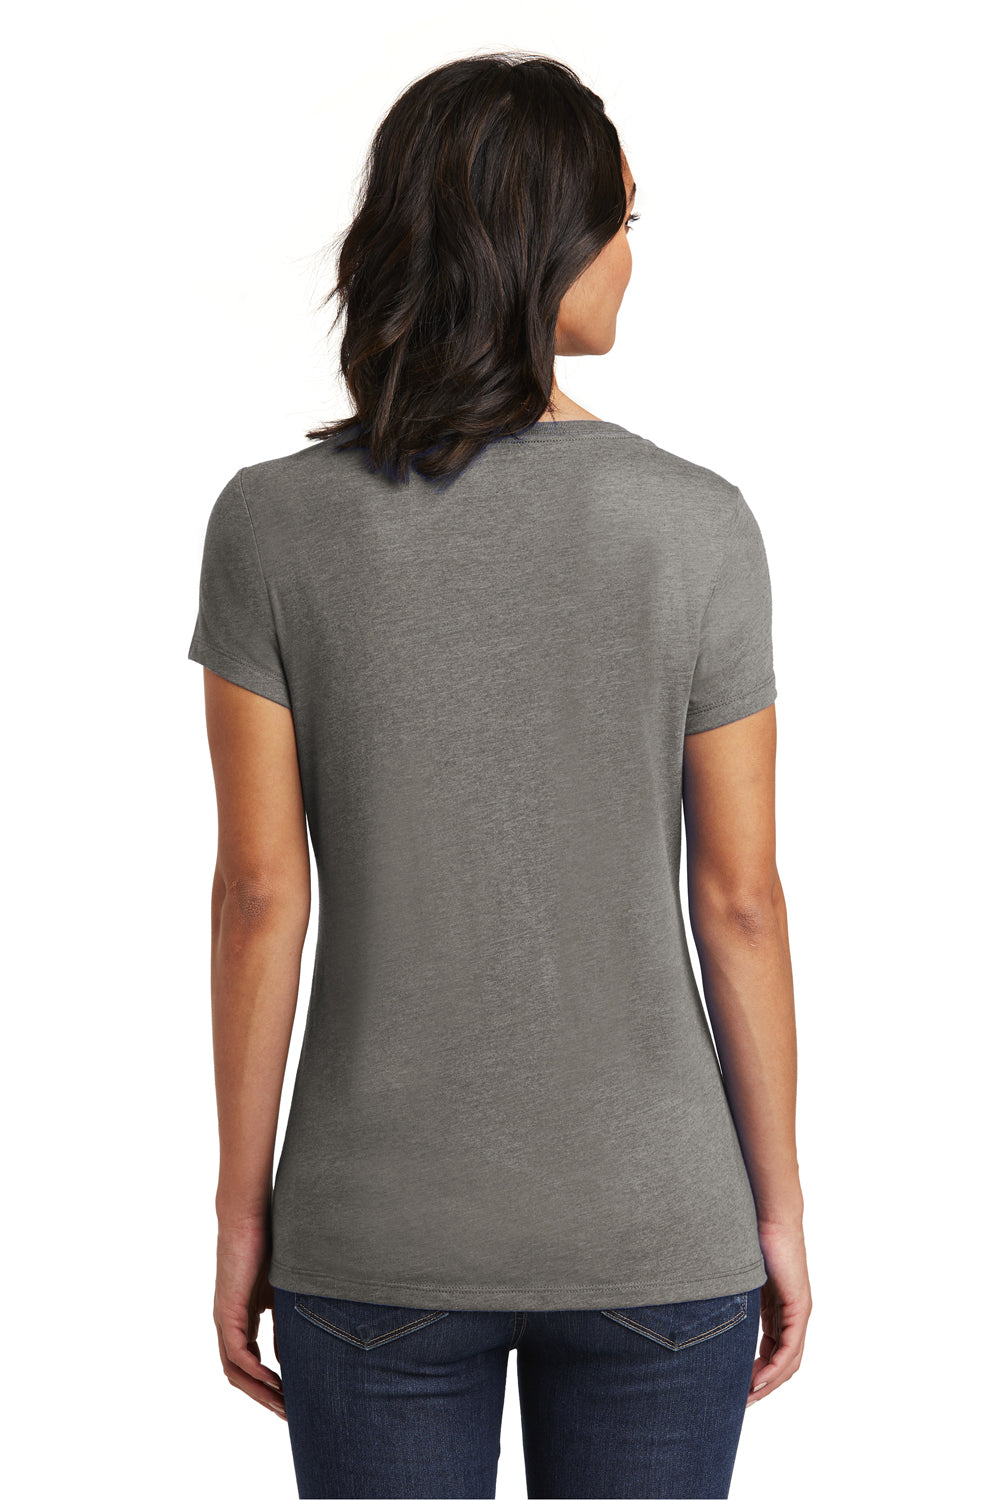 District DT6503 Womens Very Important Short Sleeve V-Neck T-Shirt Heather Grey Back